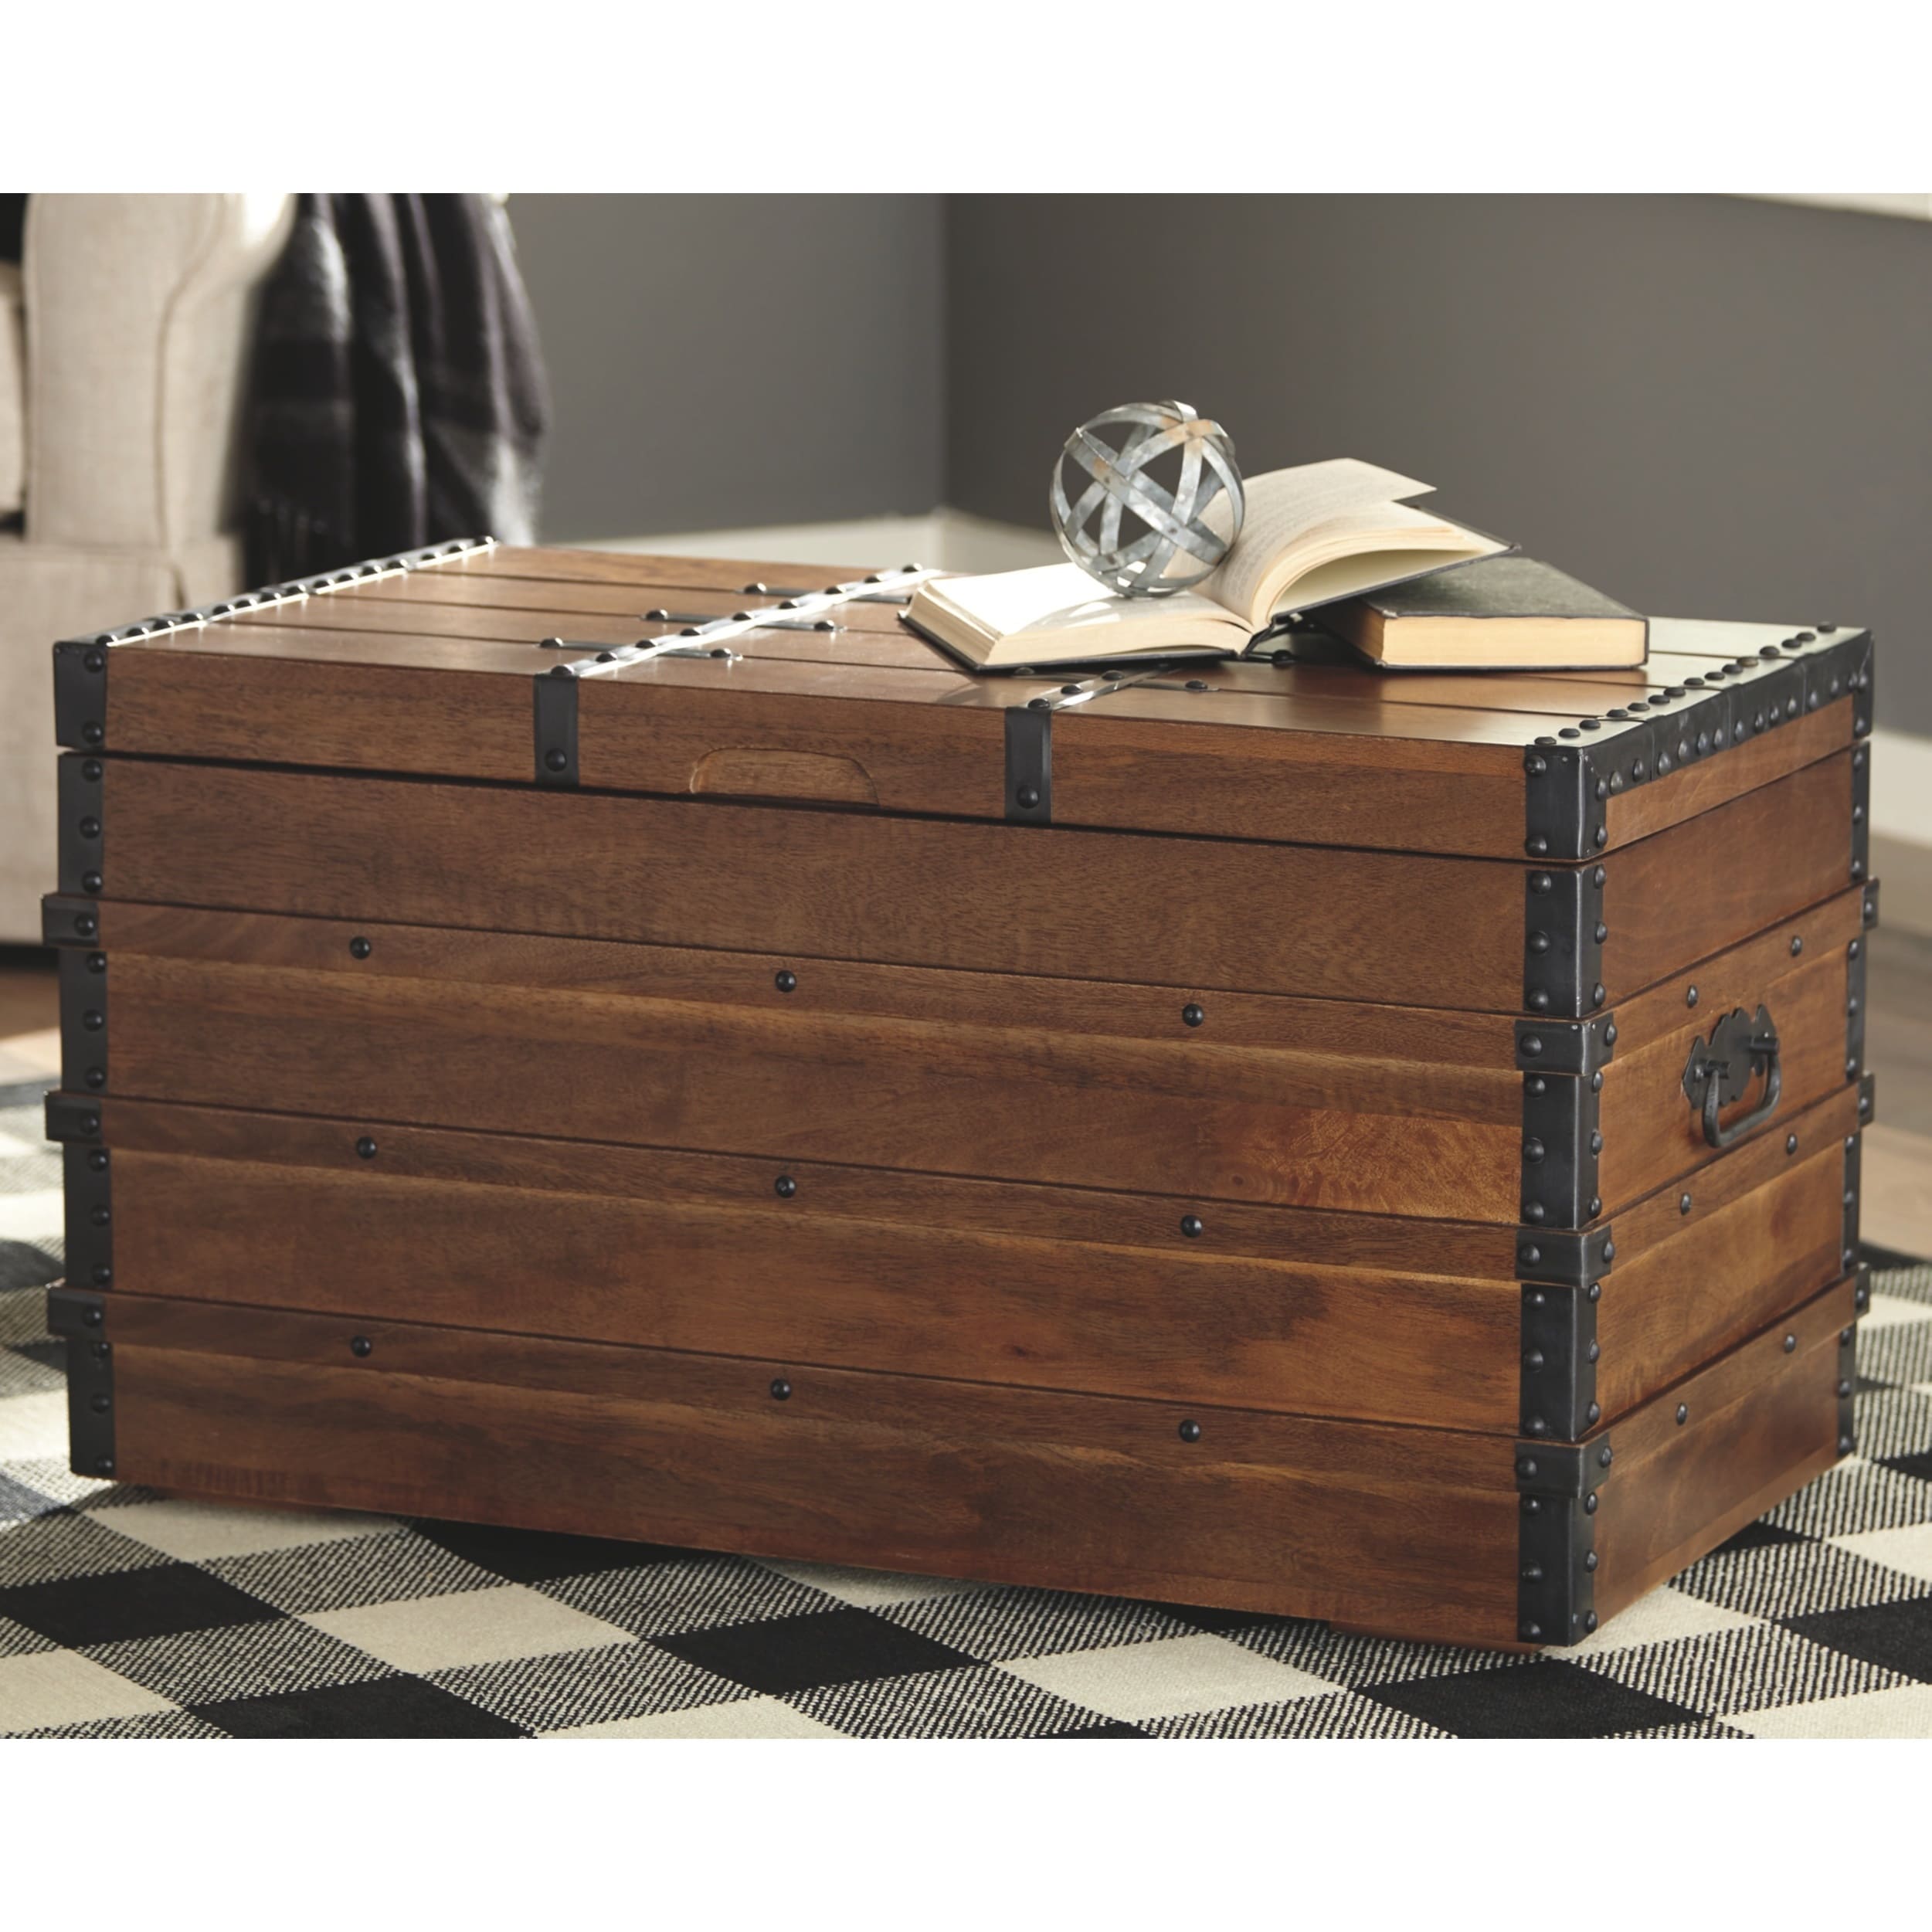 extra large wooden toy box